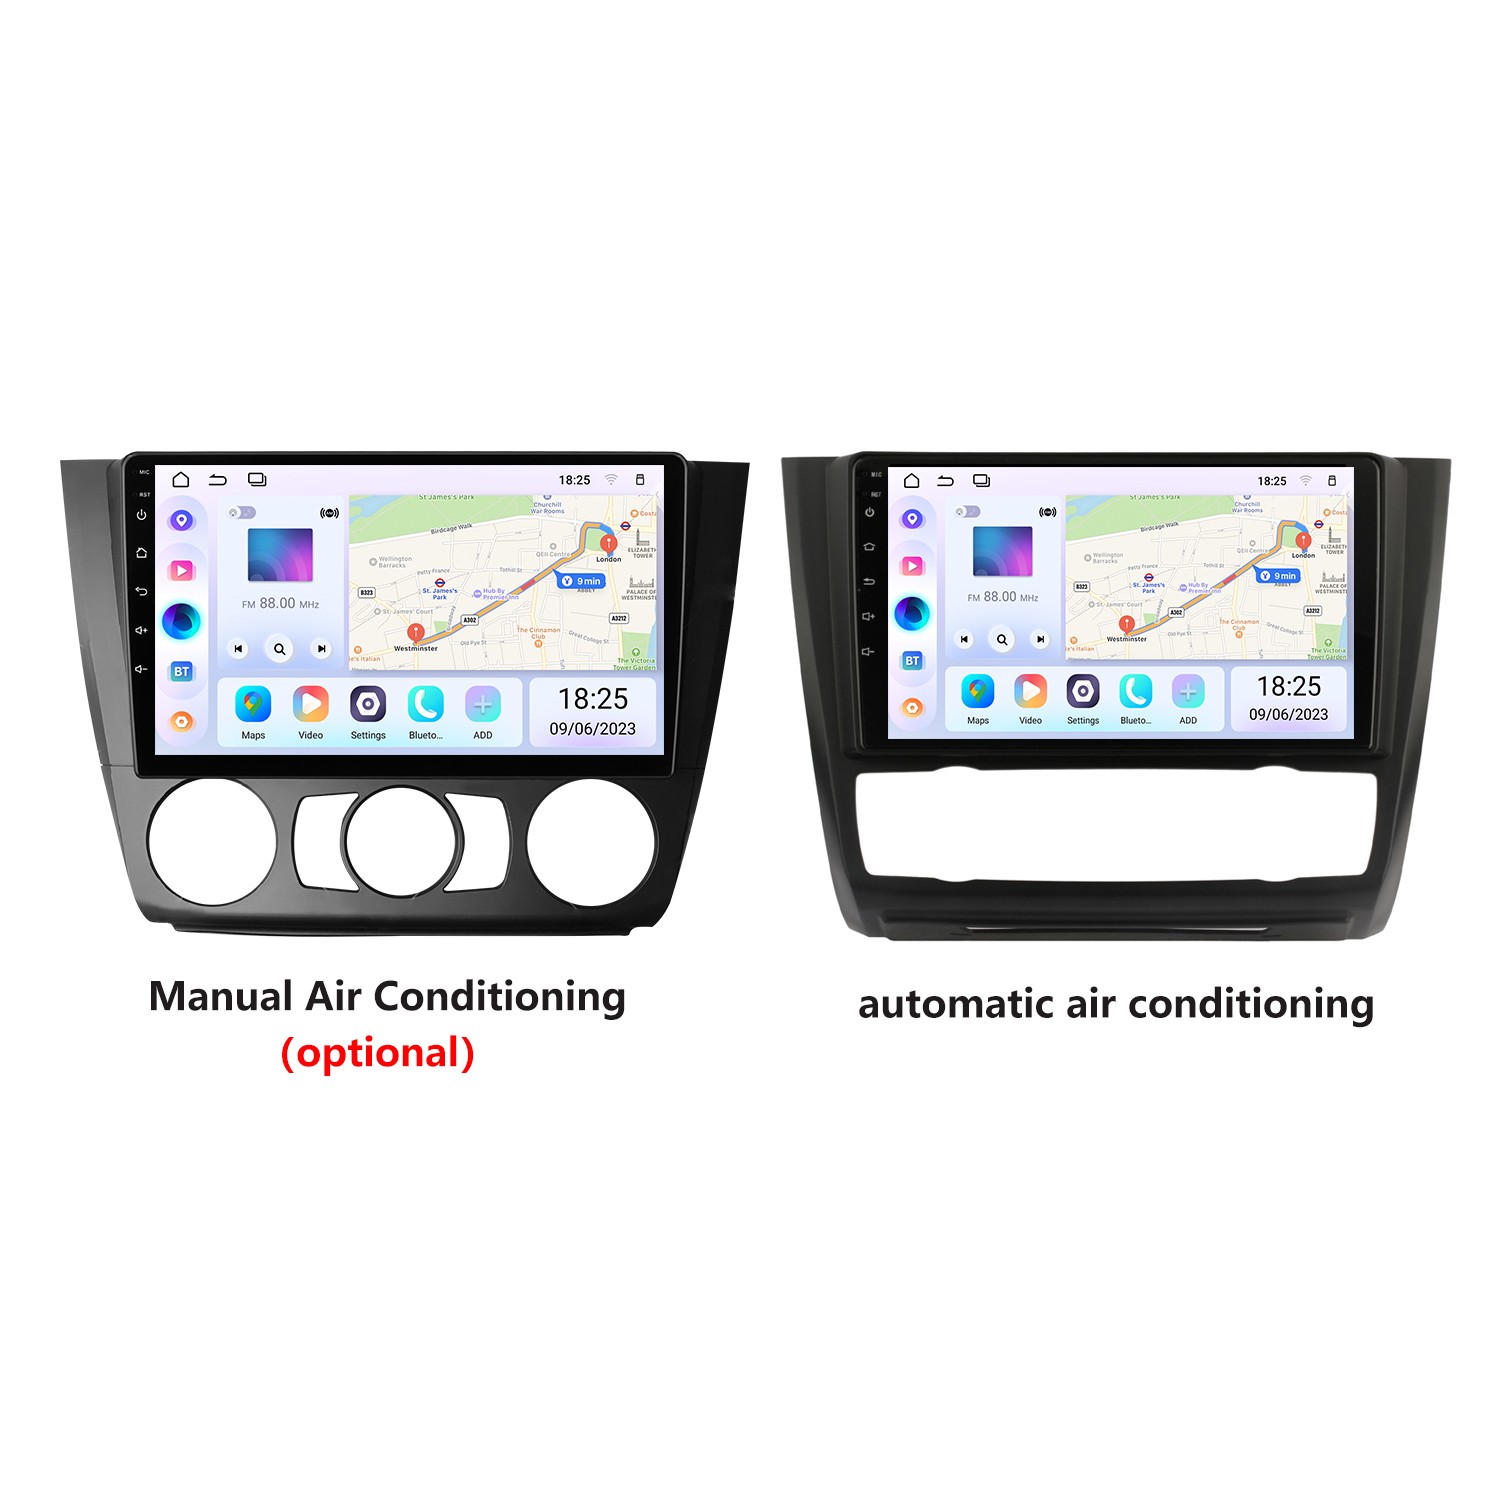 HD E82 support Radio Navigation Android 9 with GPS Series Bluetooth 116i 1 130i System Carplay E81 120i Touchscreen DVR BMW For 2004-2012 13.0 inch 118i